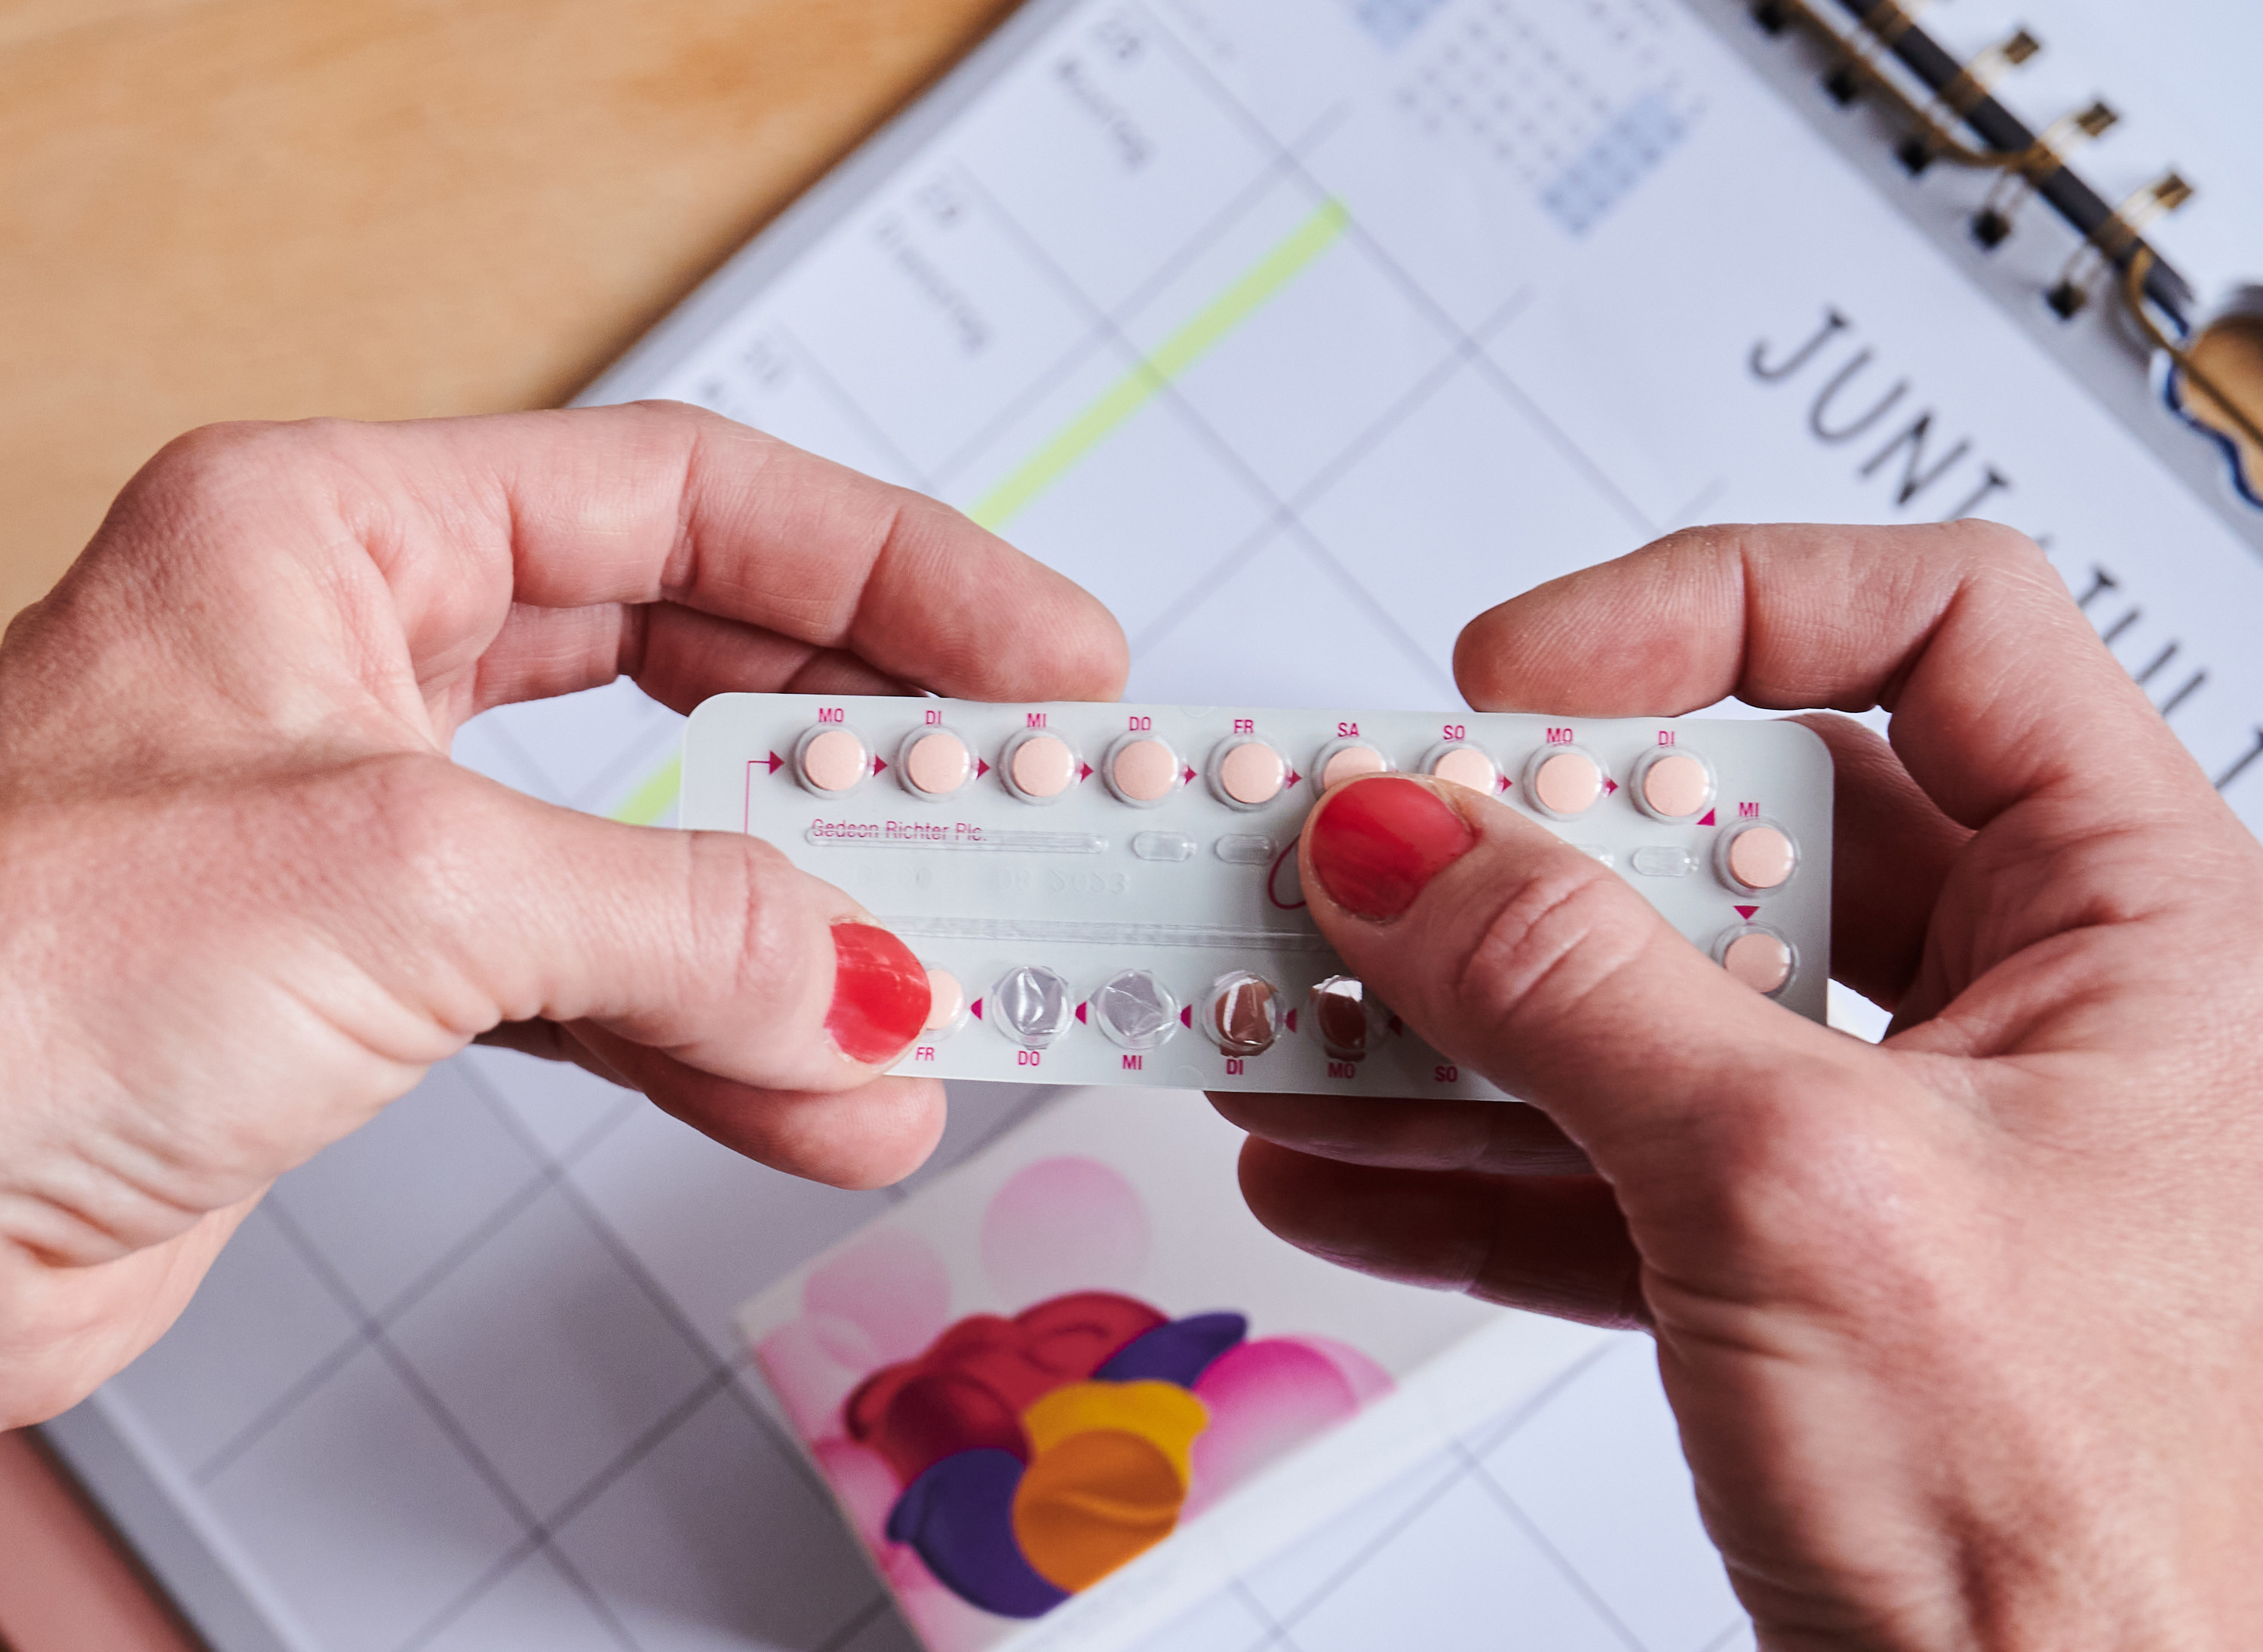 Hands hold a package of birth control pills